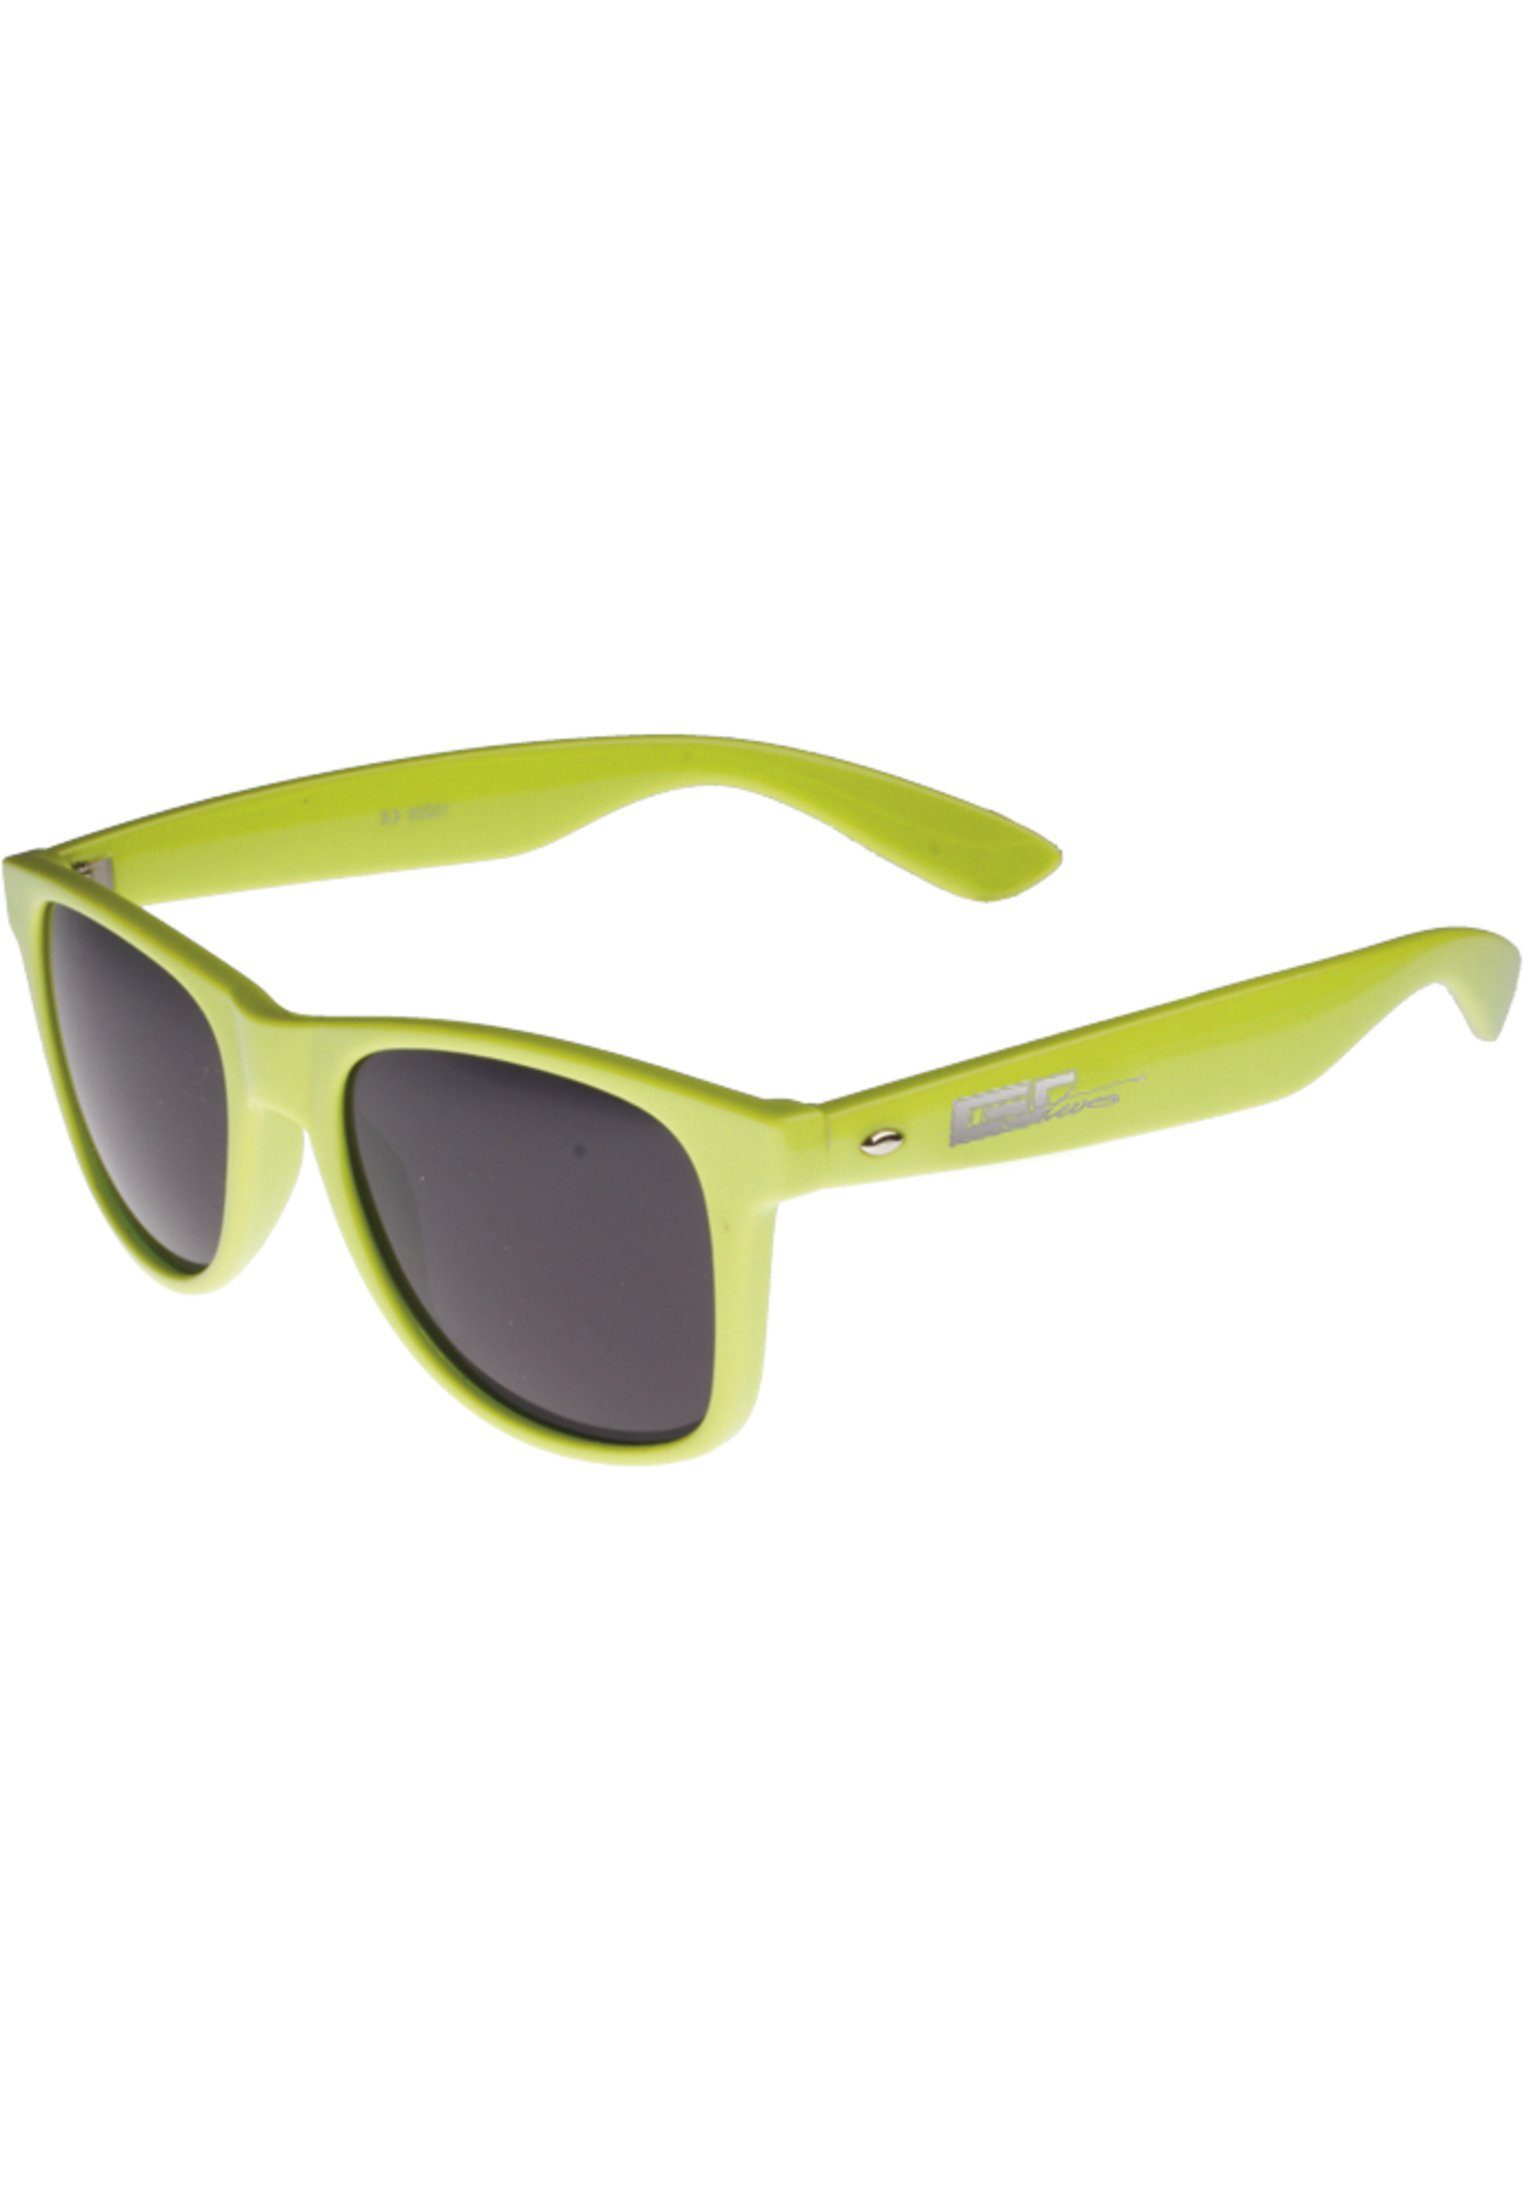 MSTRDS Sonnenbrille Accessoires Groove Shades GStwo neongreen